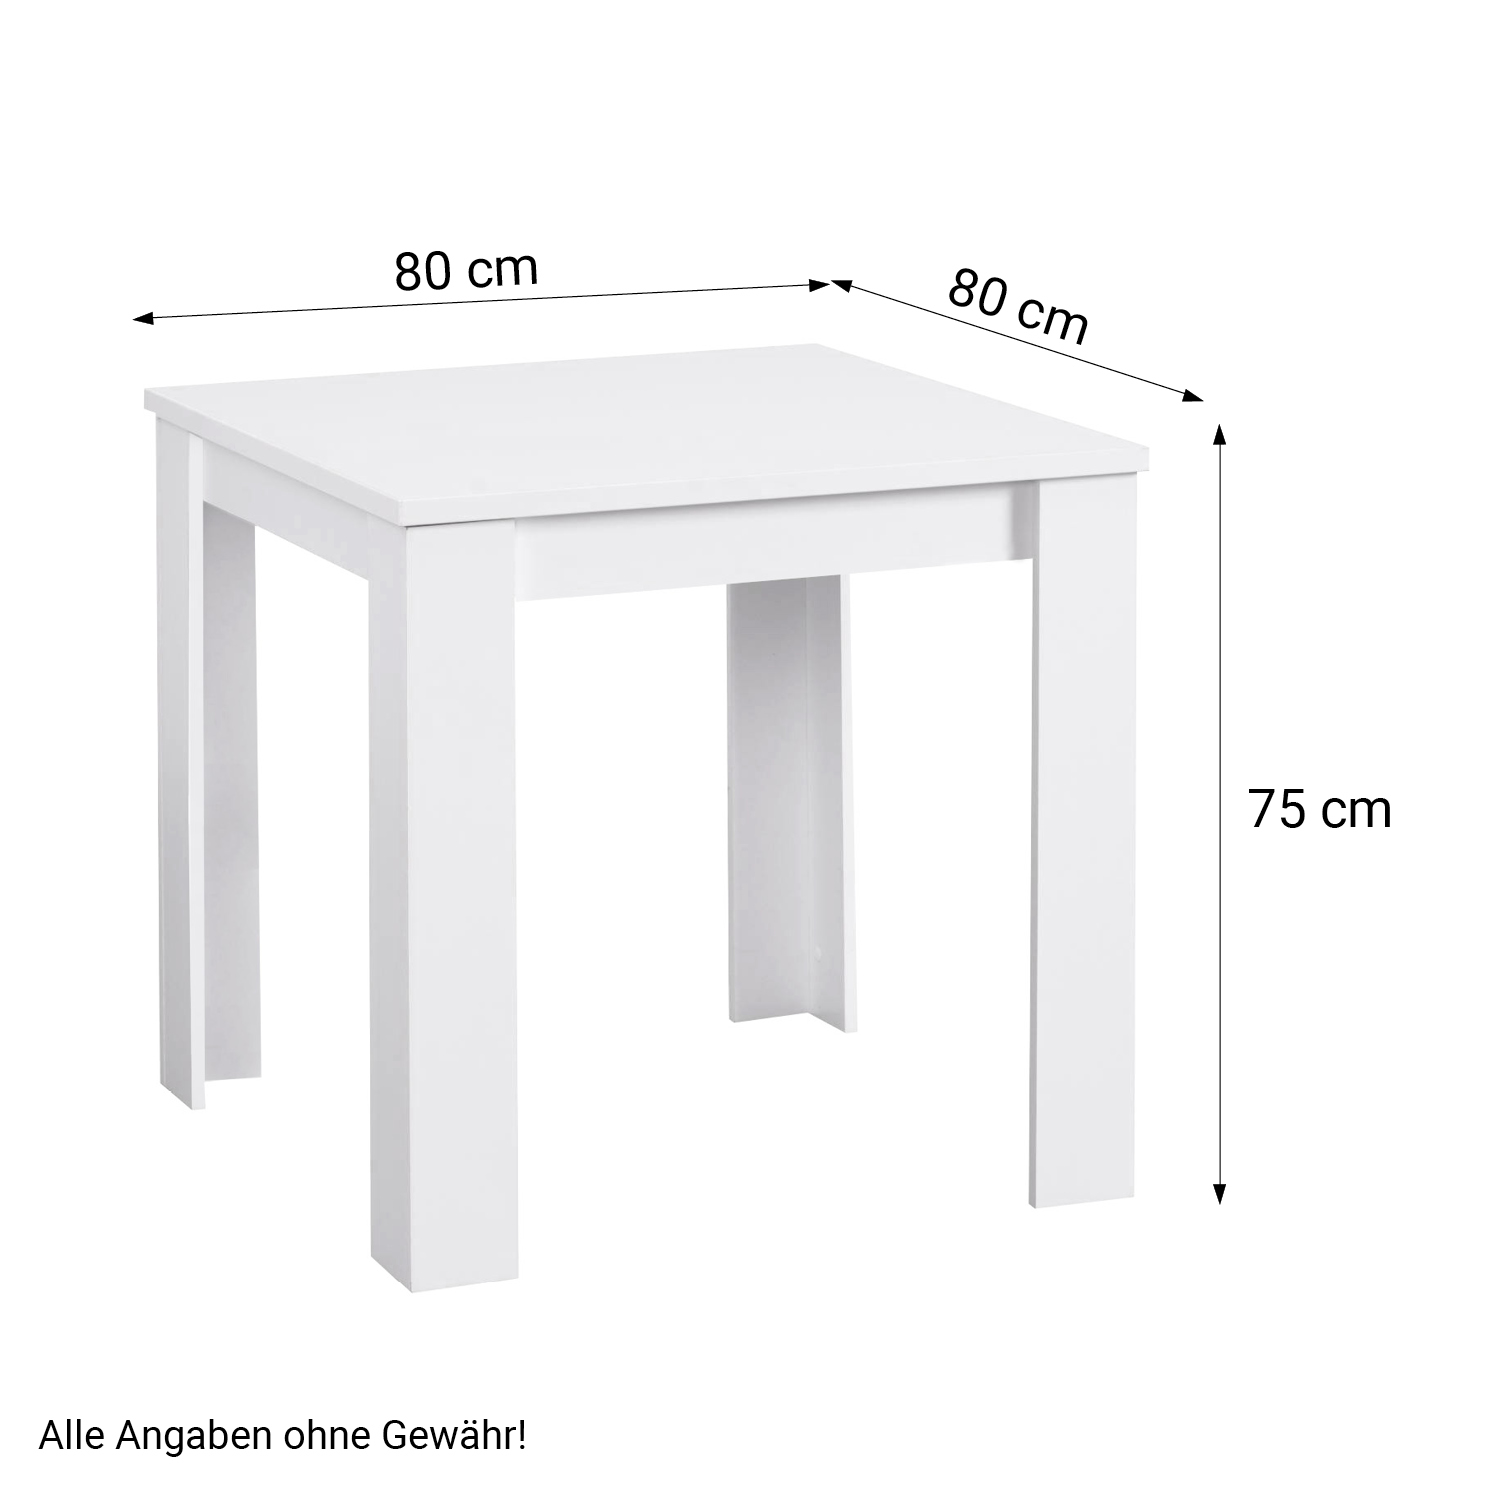 Modern White Dining Table 80x80 cm with 2 Chairs Anthracite Dining Room Table Wooden Table